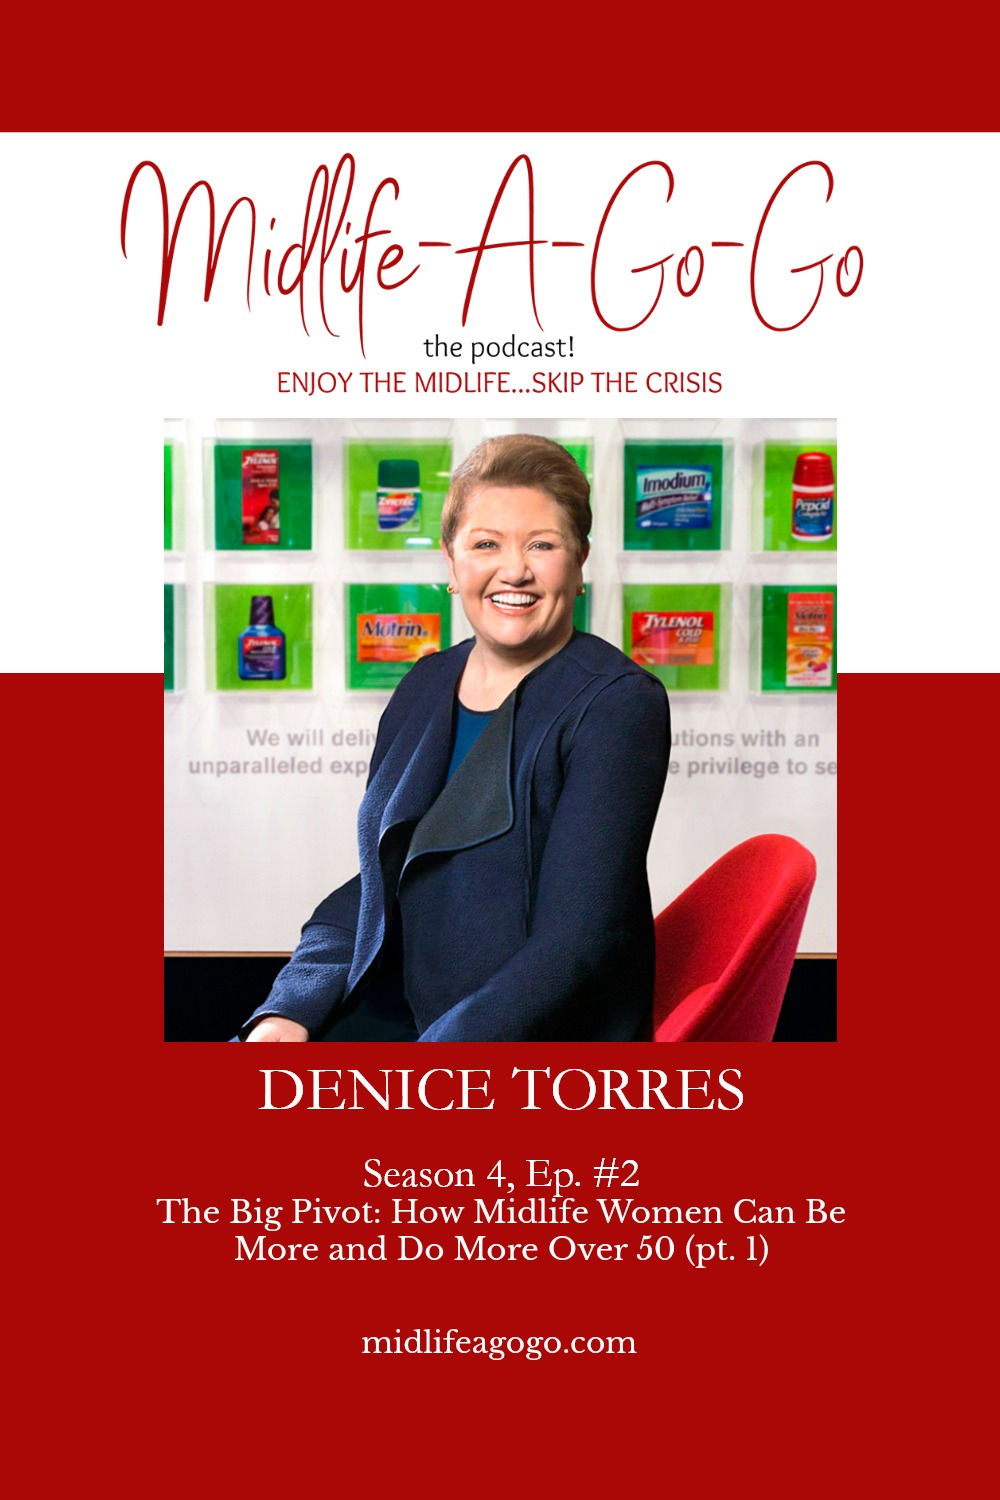 The Big Pivot: How Midlife Women Can Be More and Do More Over 50 pt. 1 with Denice Torres